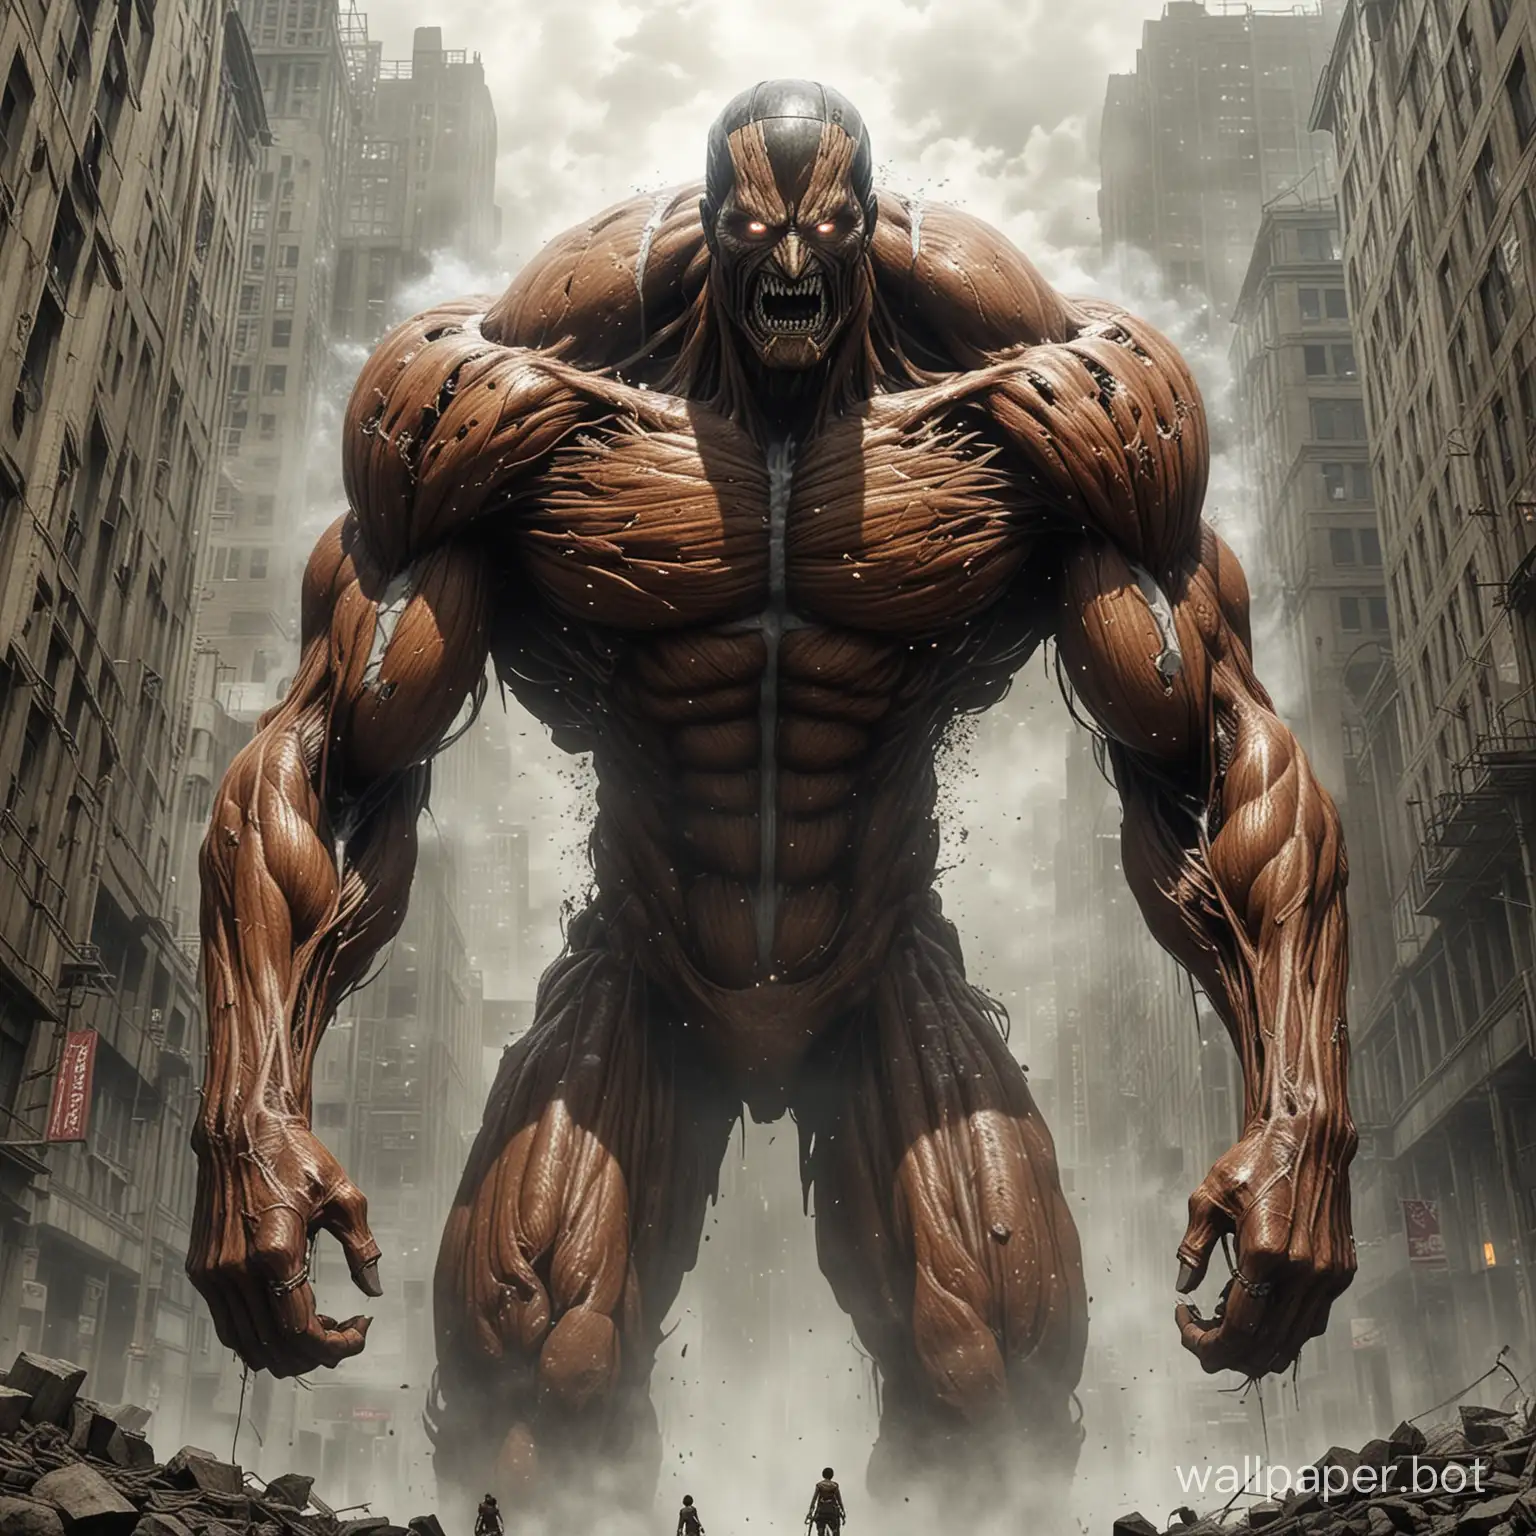 Envision a colossal figure from "Attack on Titan," standing at an immense height of several stories, with thick, rock-hard skin that is nearly impervious to conventional weapons. This super-sized giant's body is corded with powerful muscles that ripple beneath its grayish exterior, and it moves with surprising agility despite its massive size. Its face is etched with a ferocious expression, and its eyes burn with an intense, otherworldly glower. As it emerges from the shrouding mists, its sheer scale and intimidating presence strike fear into the hearts of those who behold it, just as they would encounter the most formidable being from the world of "Attack on Titan."